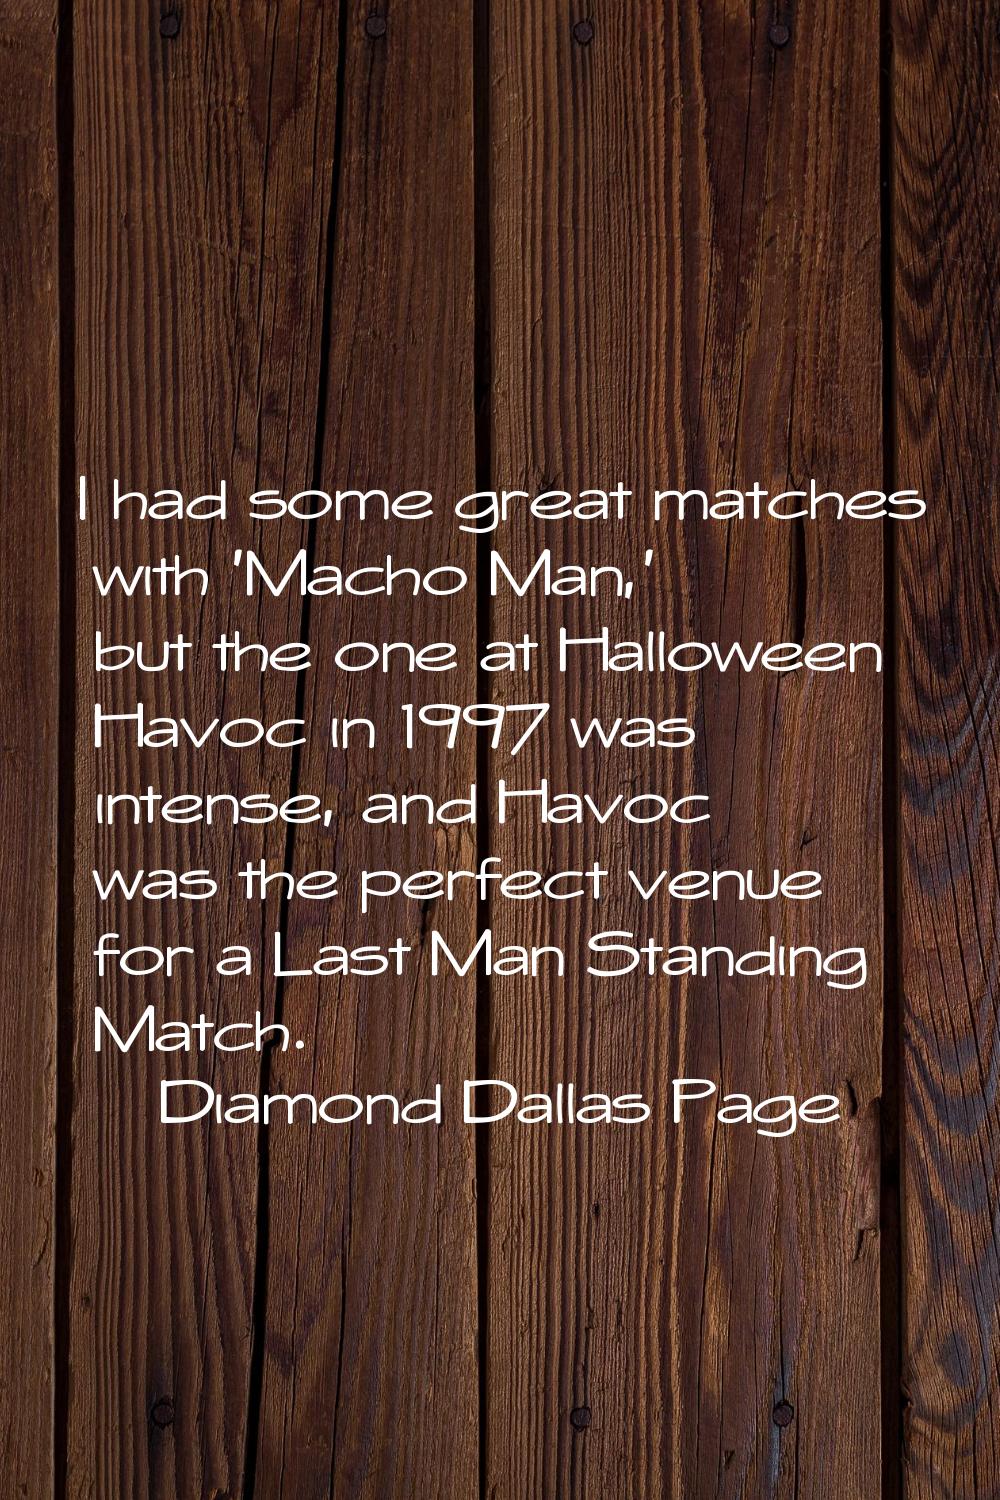 I had some great matches with 'Macho Man,' but the one at Halloween Havoc in 1997 was intense, and 